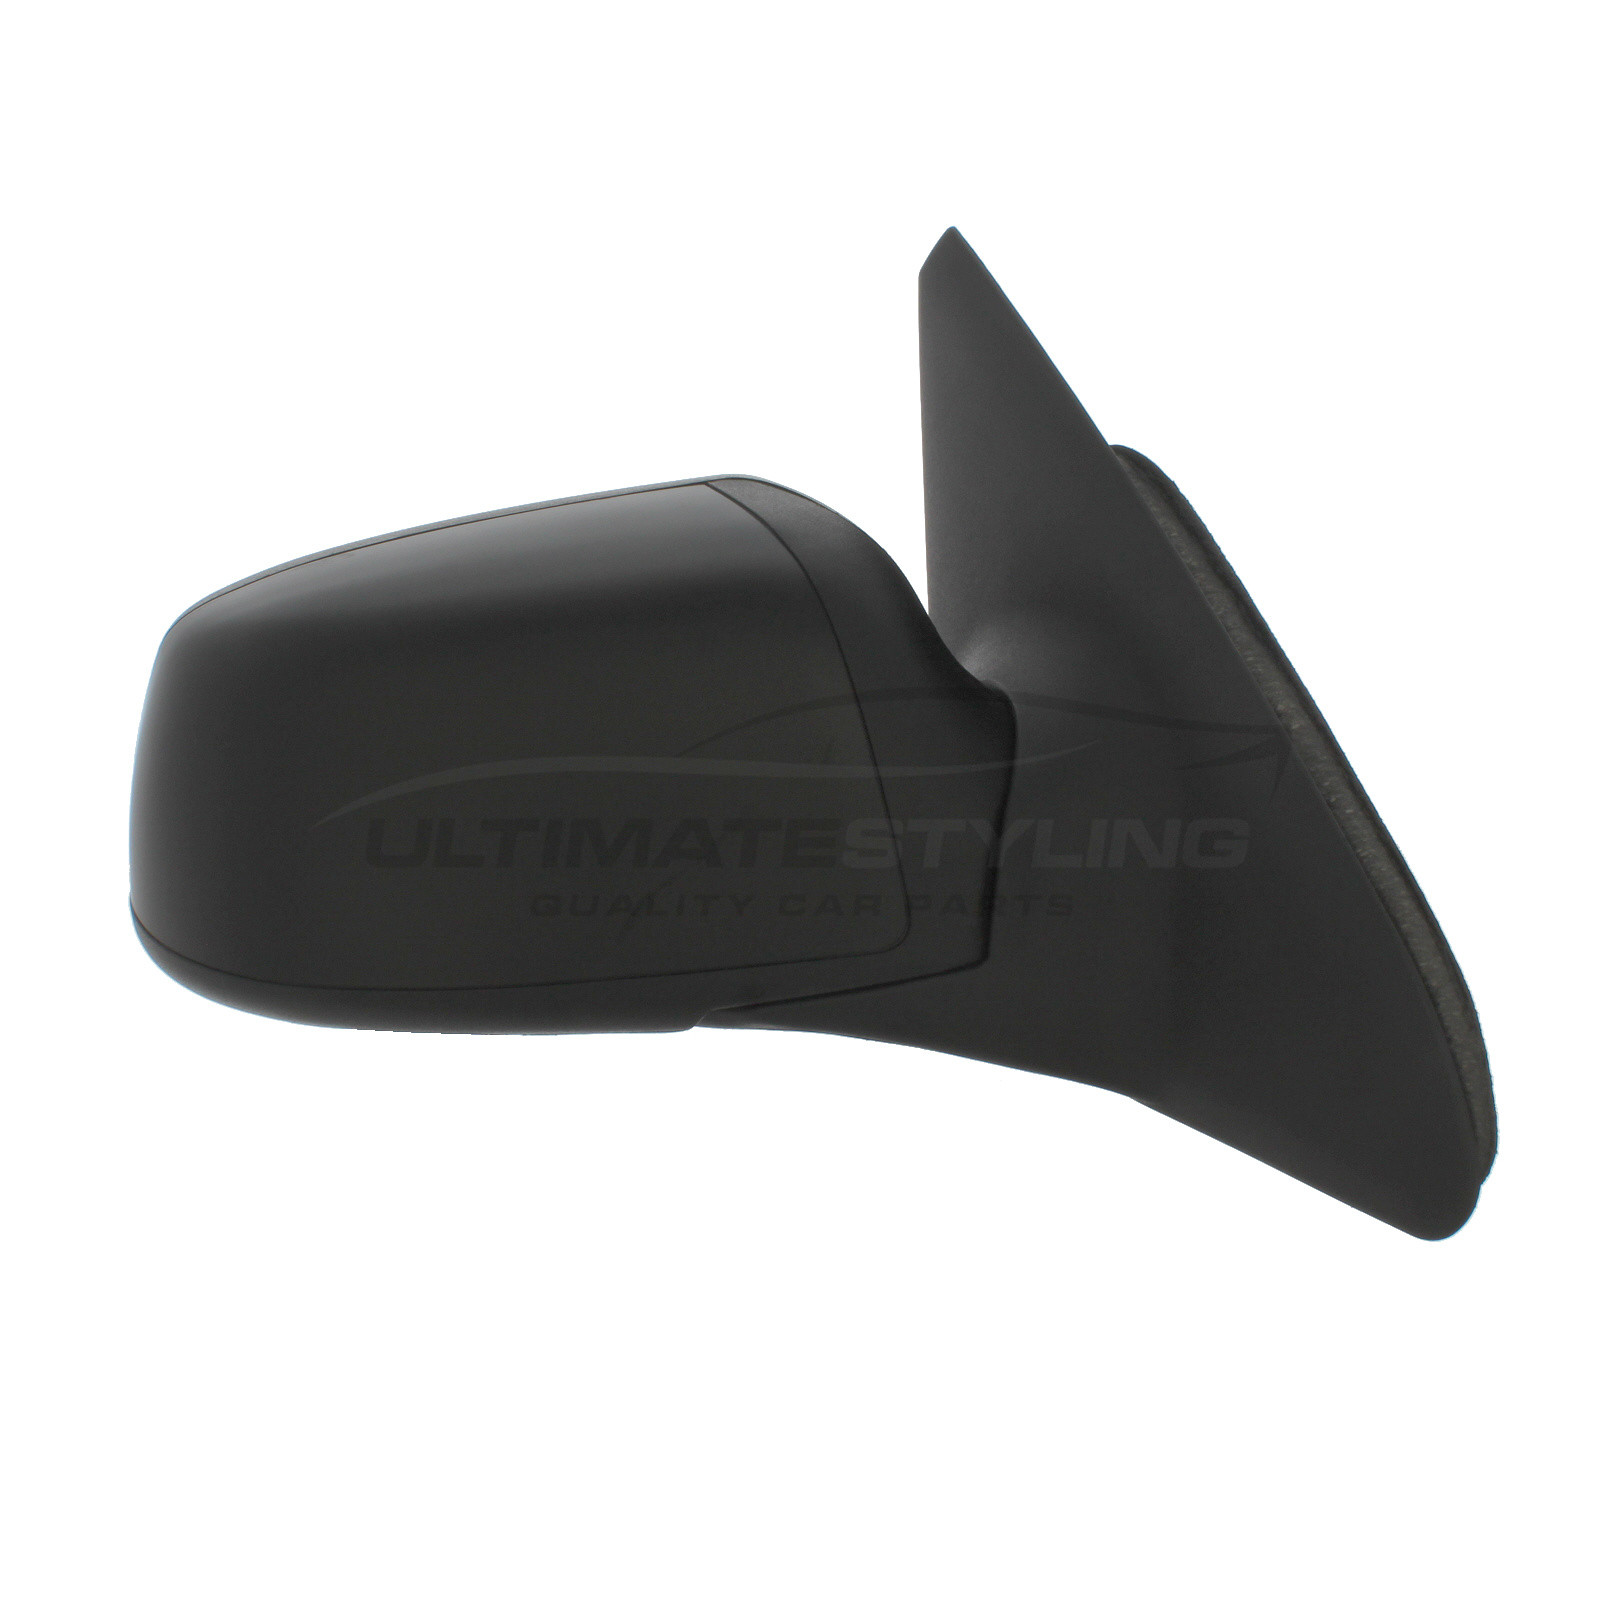 Ford Mondeo Wing Mirror / Door Mirror - Drivers Side (RH) - Electric adjustment - Heated Glass - Puddle Light - Primed